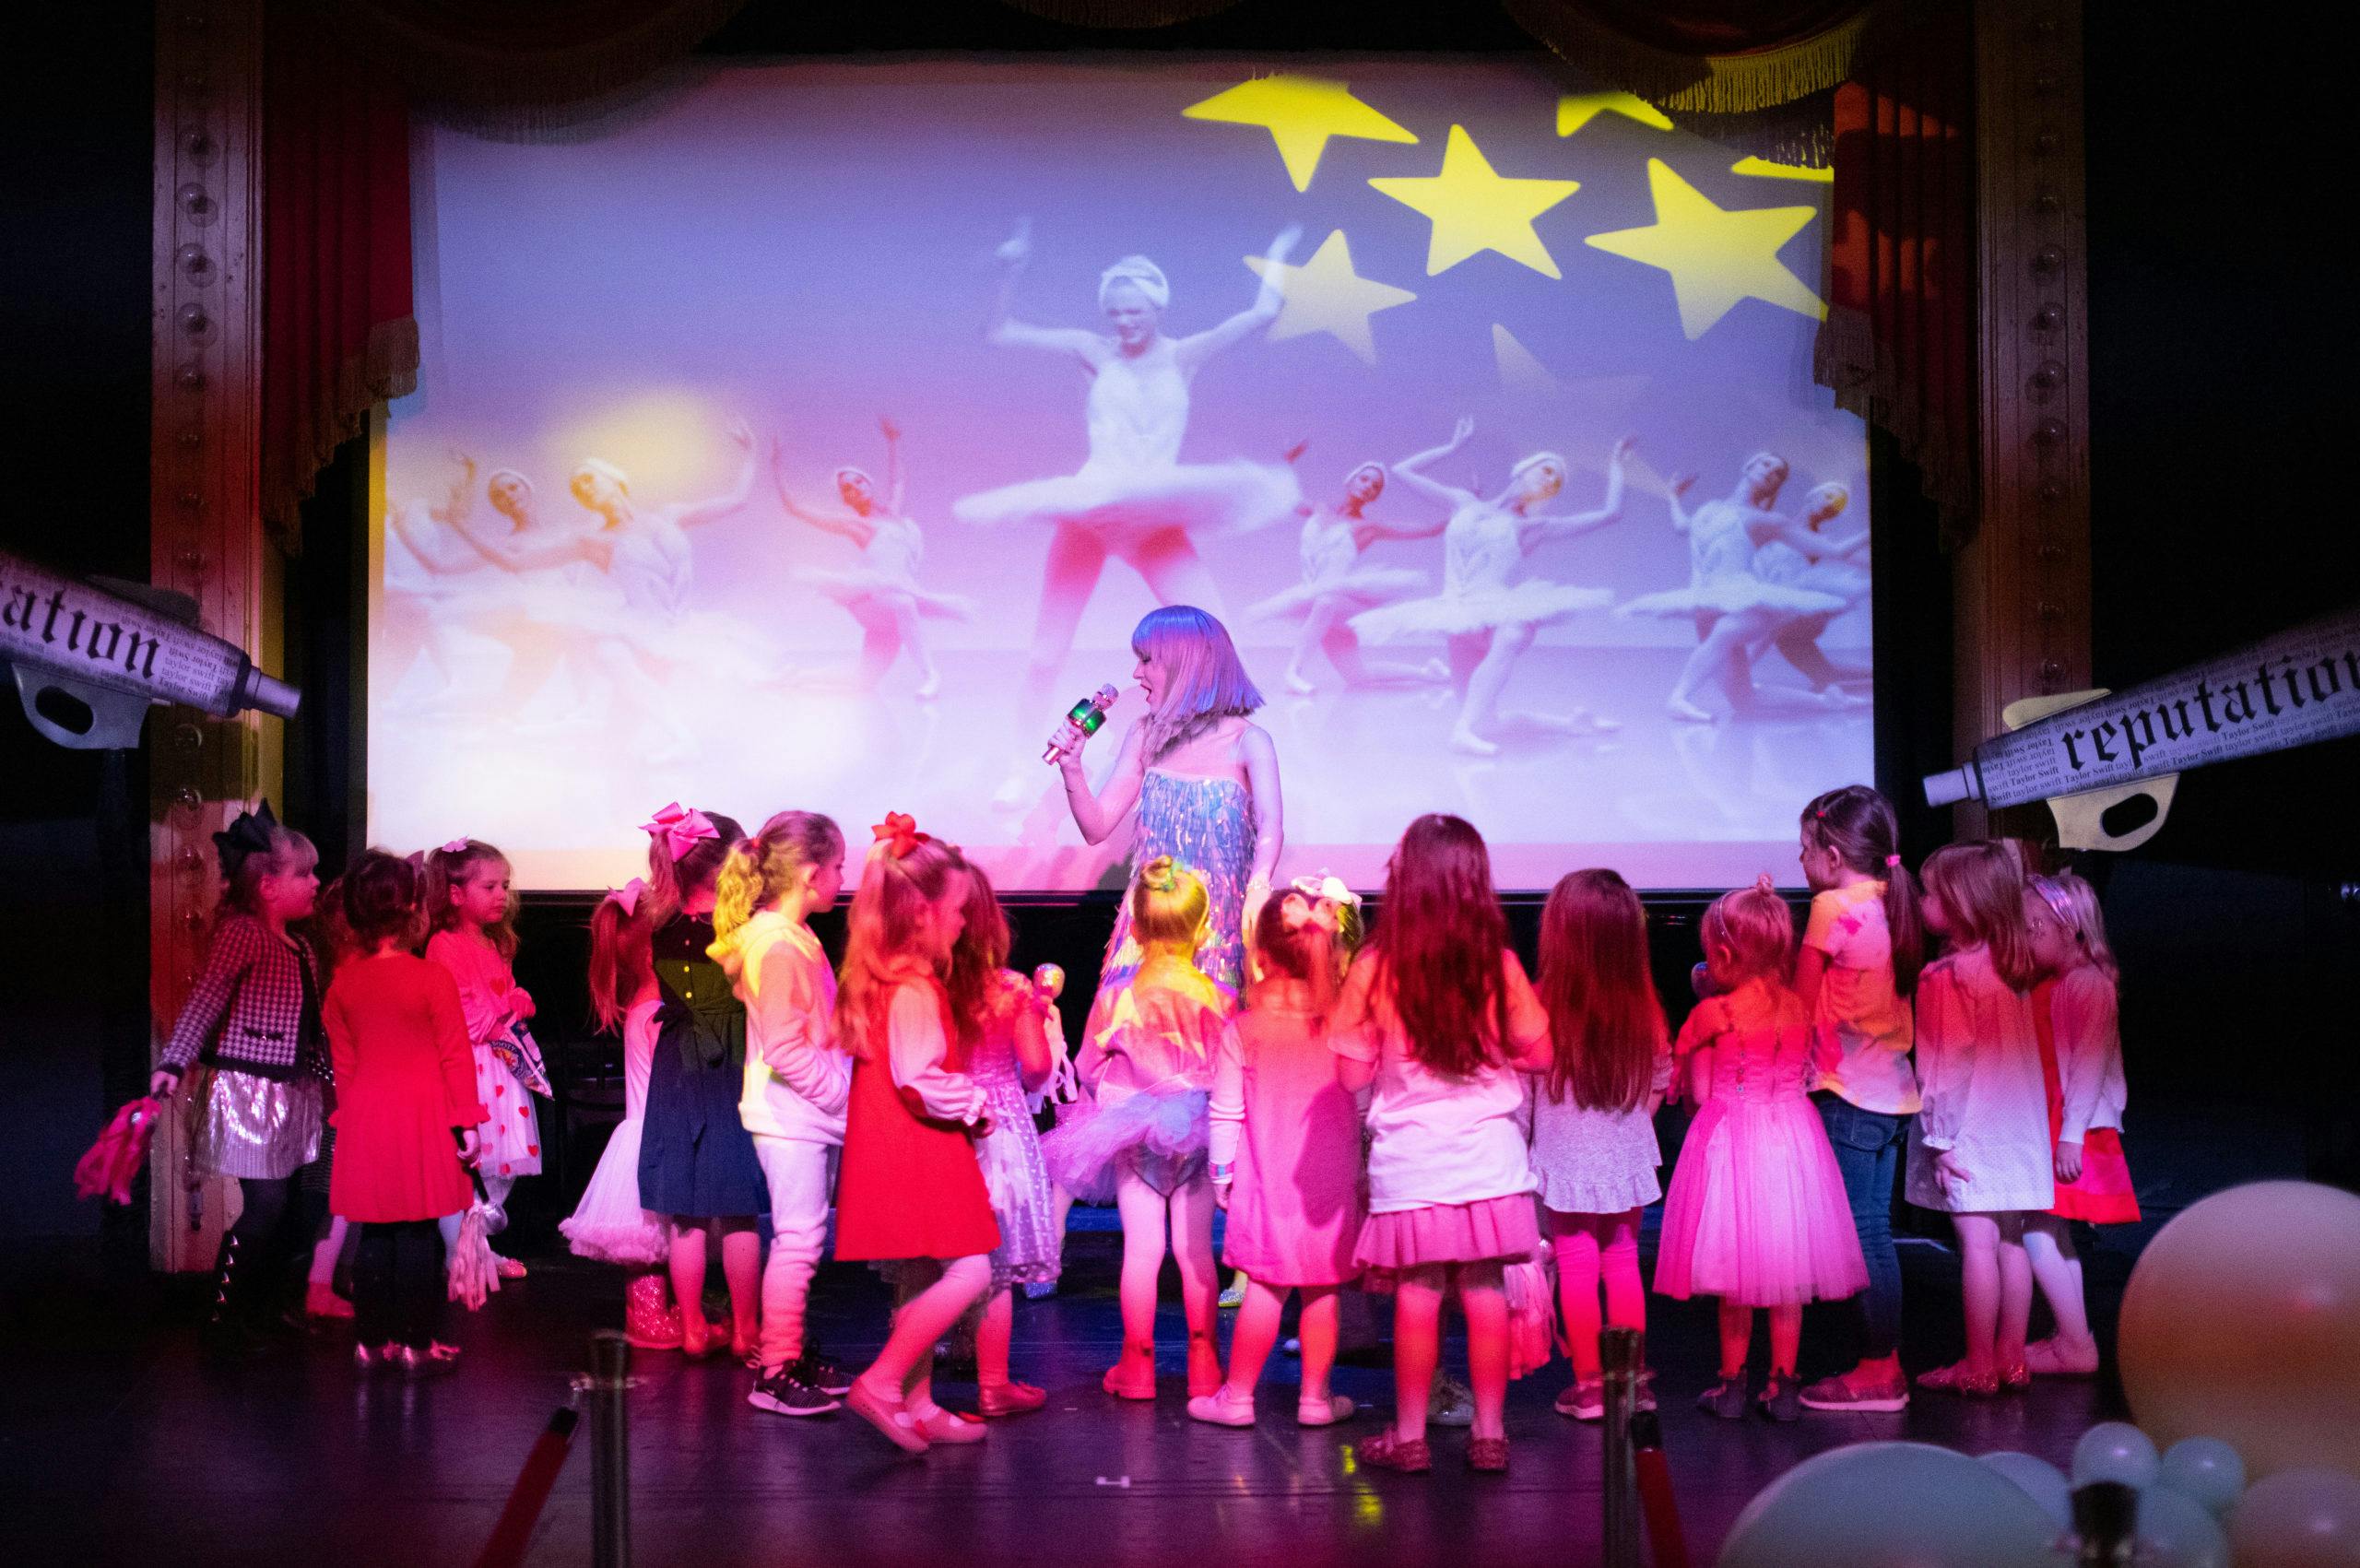 Taylor Swift Themed Kids Birthday Party in Dallas, Texas with Taylor Swift Look-Alike Performer Stage and Projector Screen | PartySlate